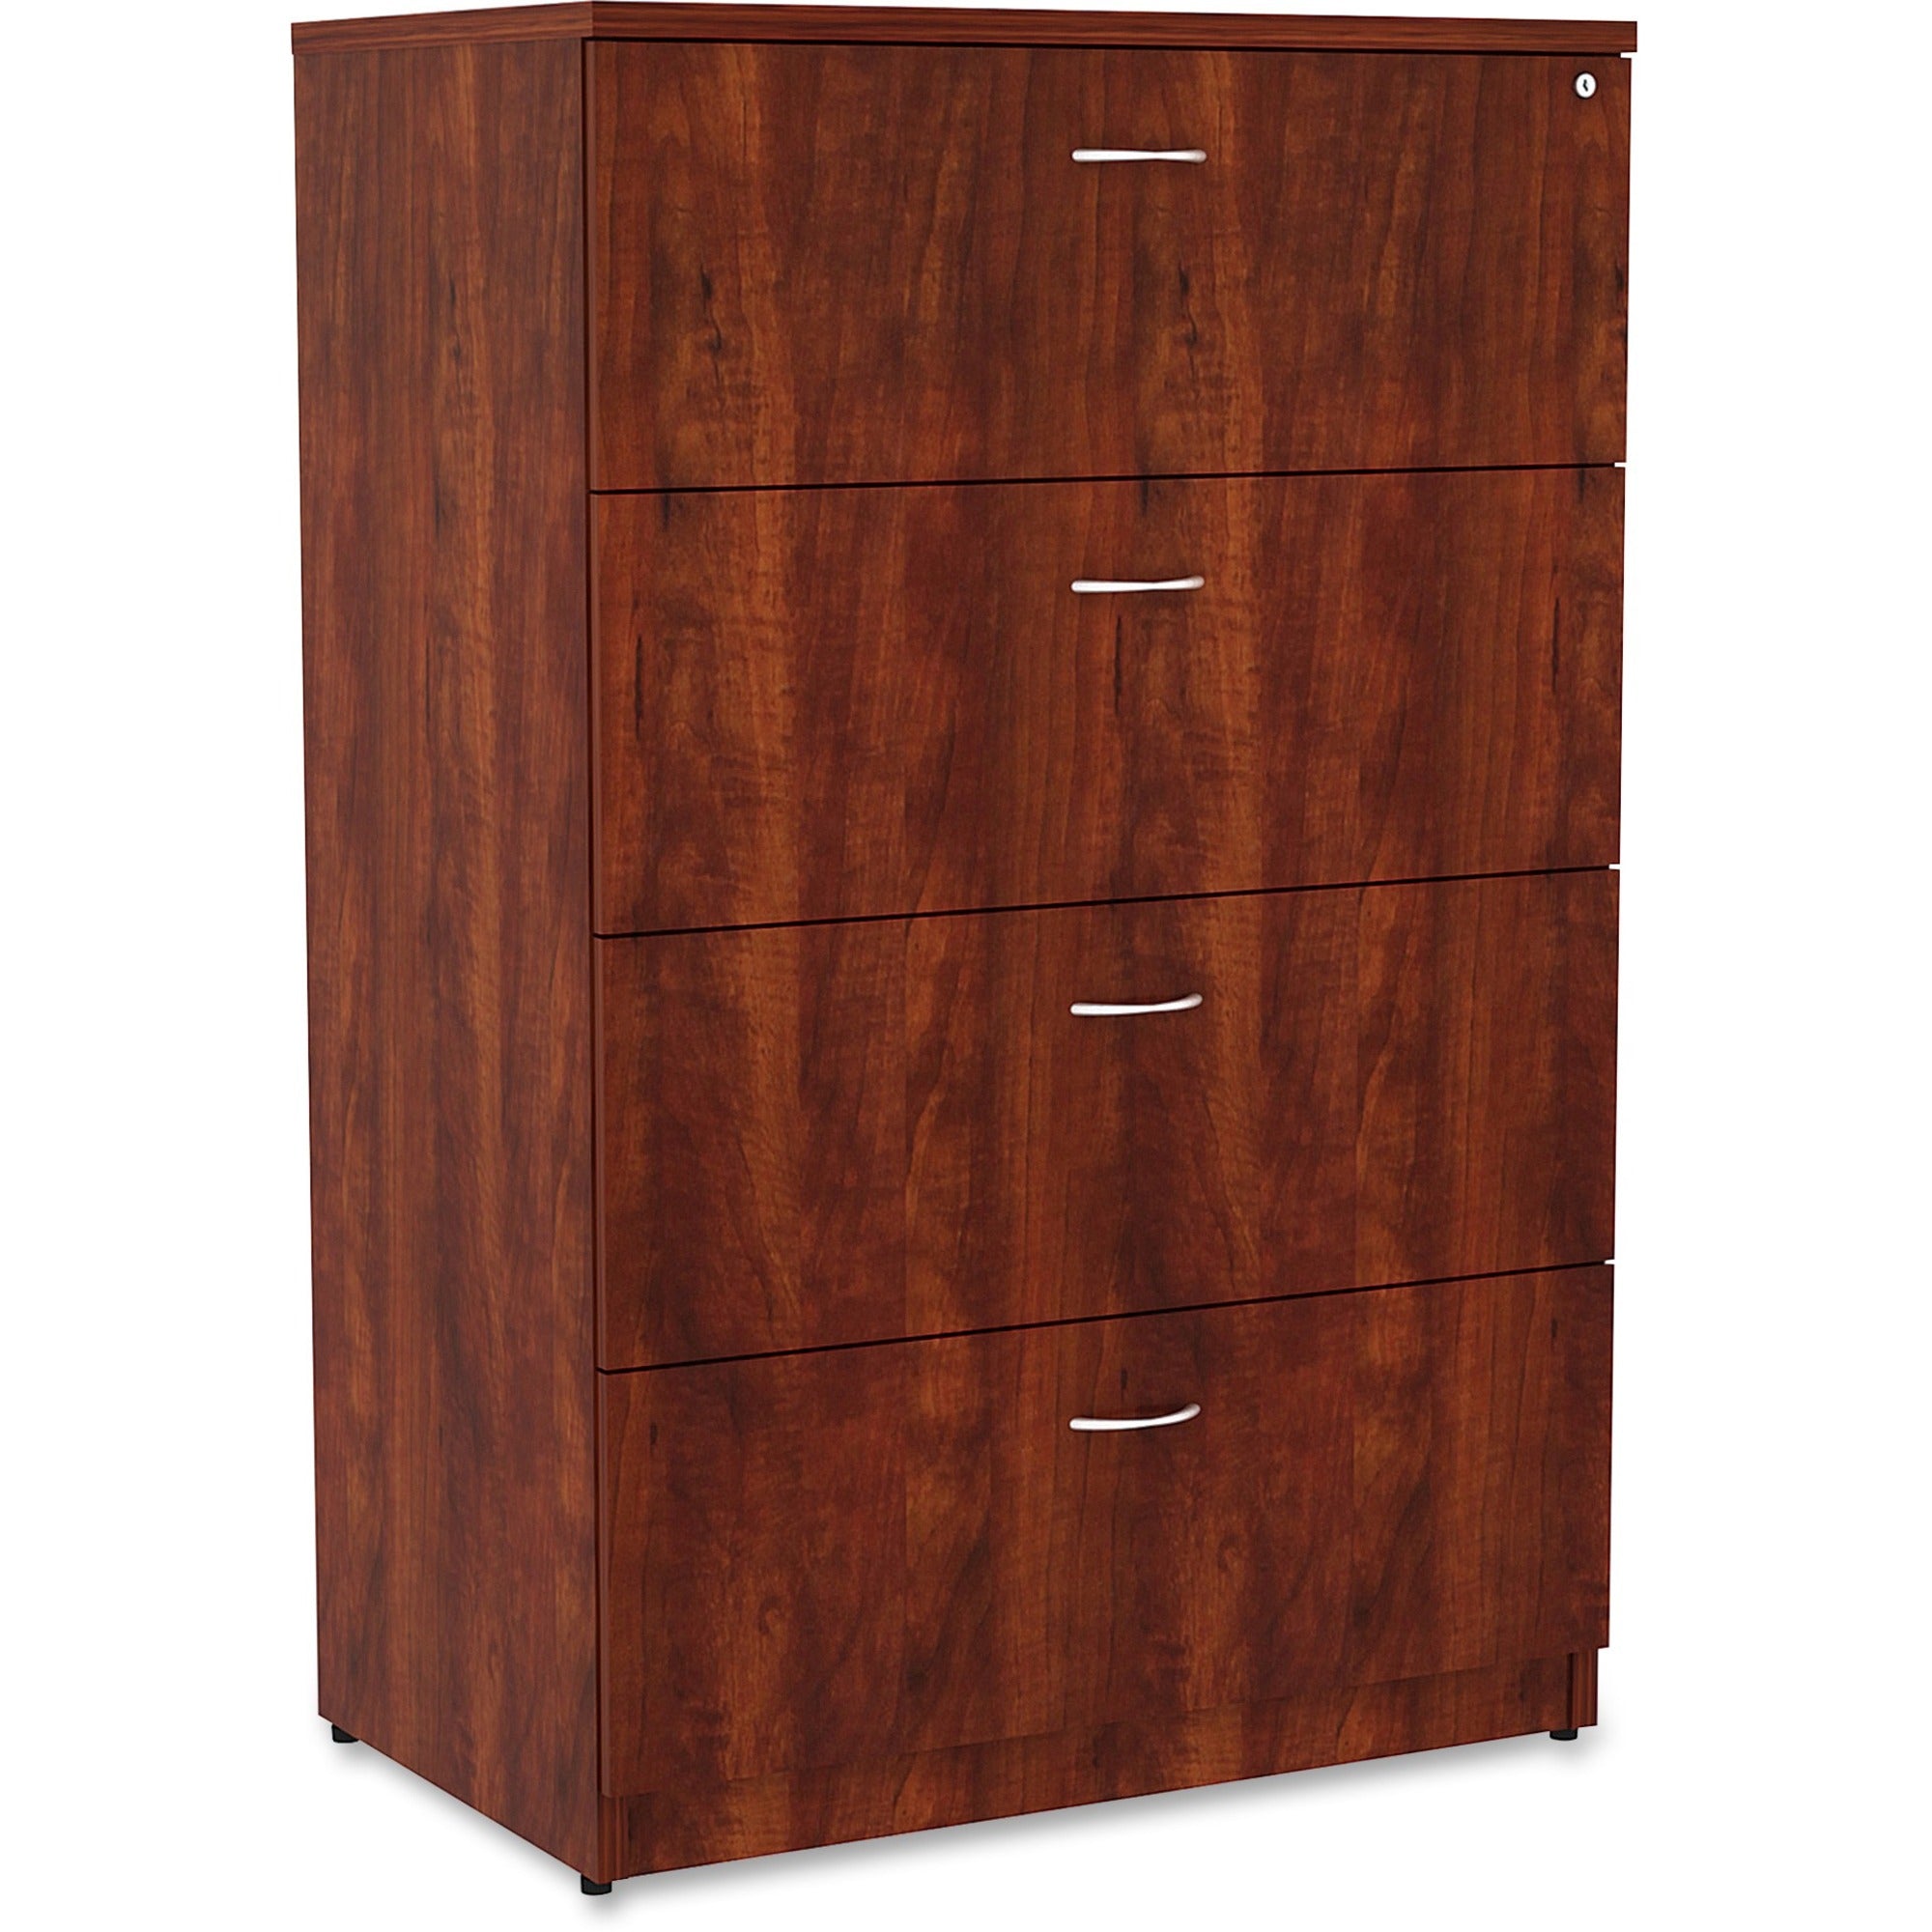 lorell-essentials-series-4-drawer-lateral-file-1-top-355-x-22548--01-edge-4-x-file-drawers-finish-cherry-laminate_llr34387 - 1